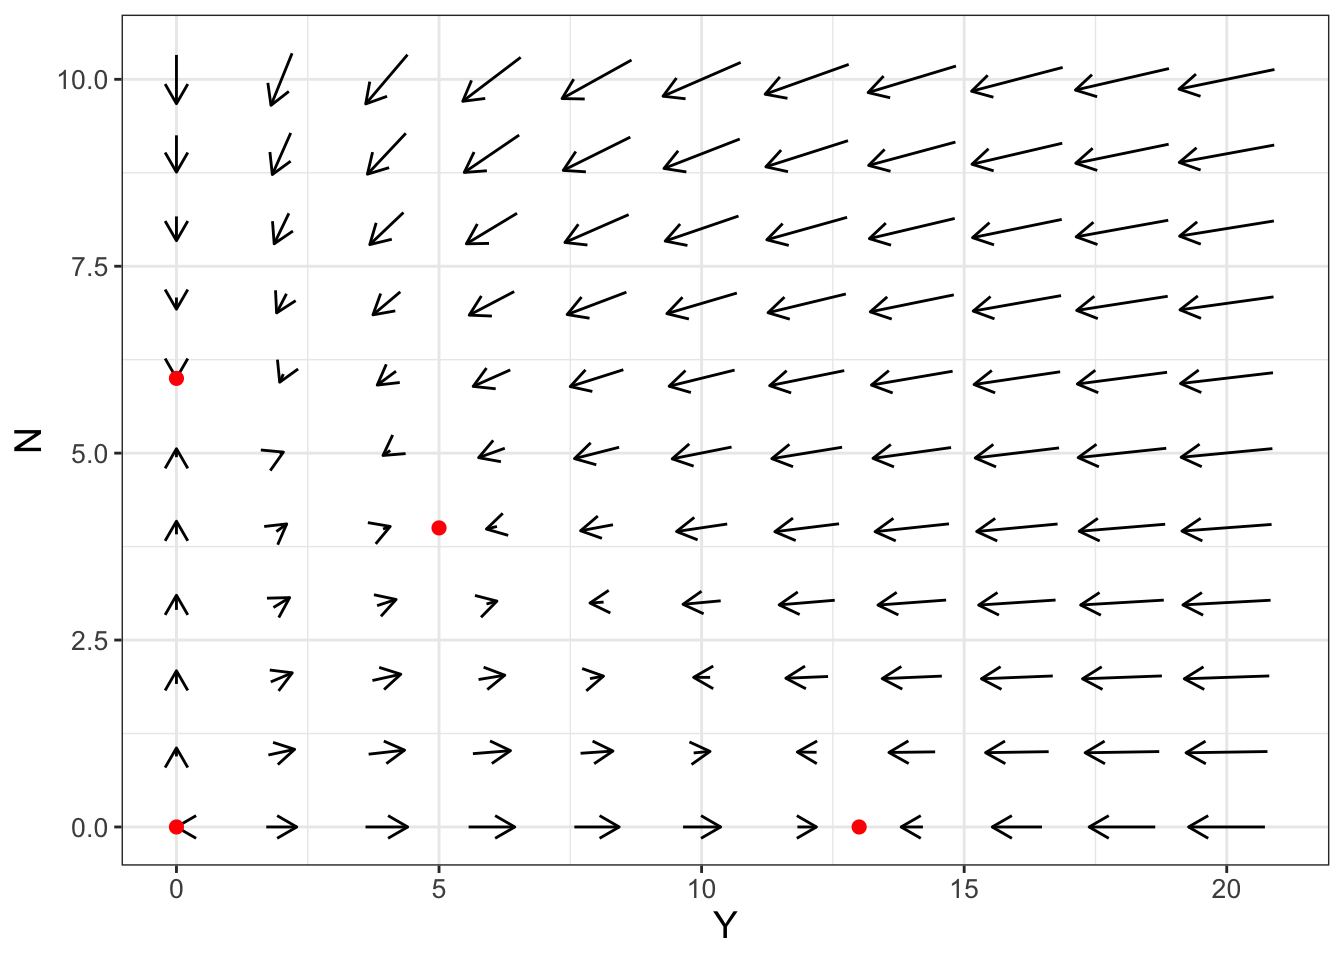 Phase plane for Equation \@ref(eq:yeast-comp-17), with equilibrium solutions shown as red points.